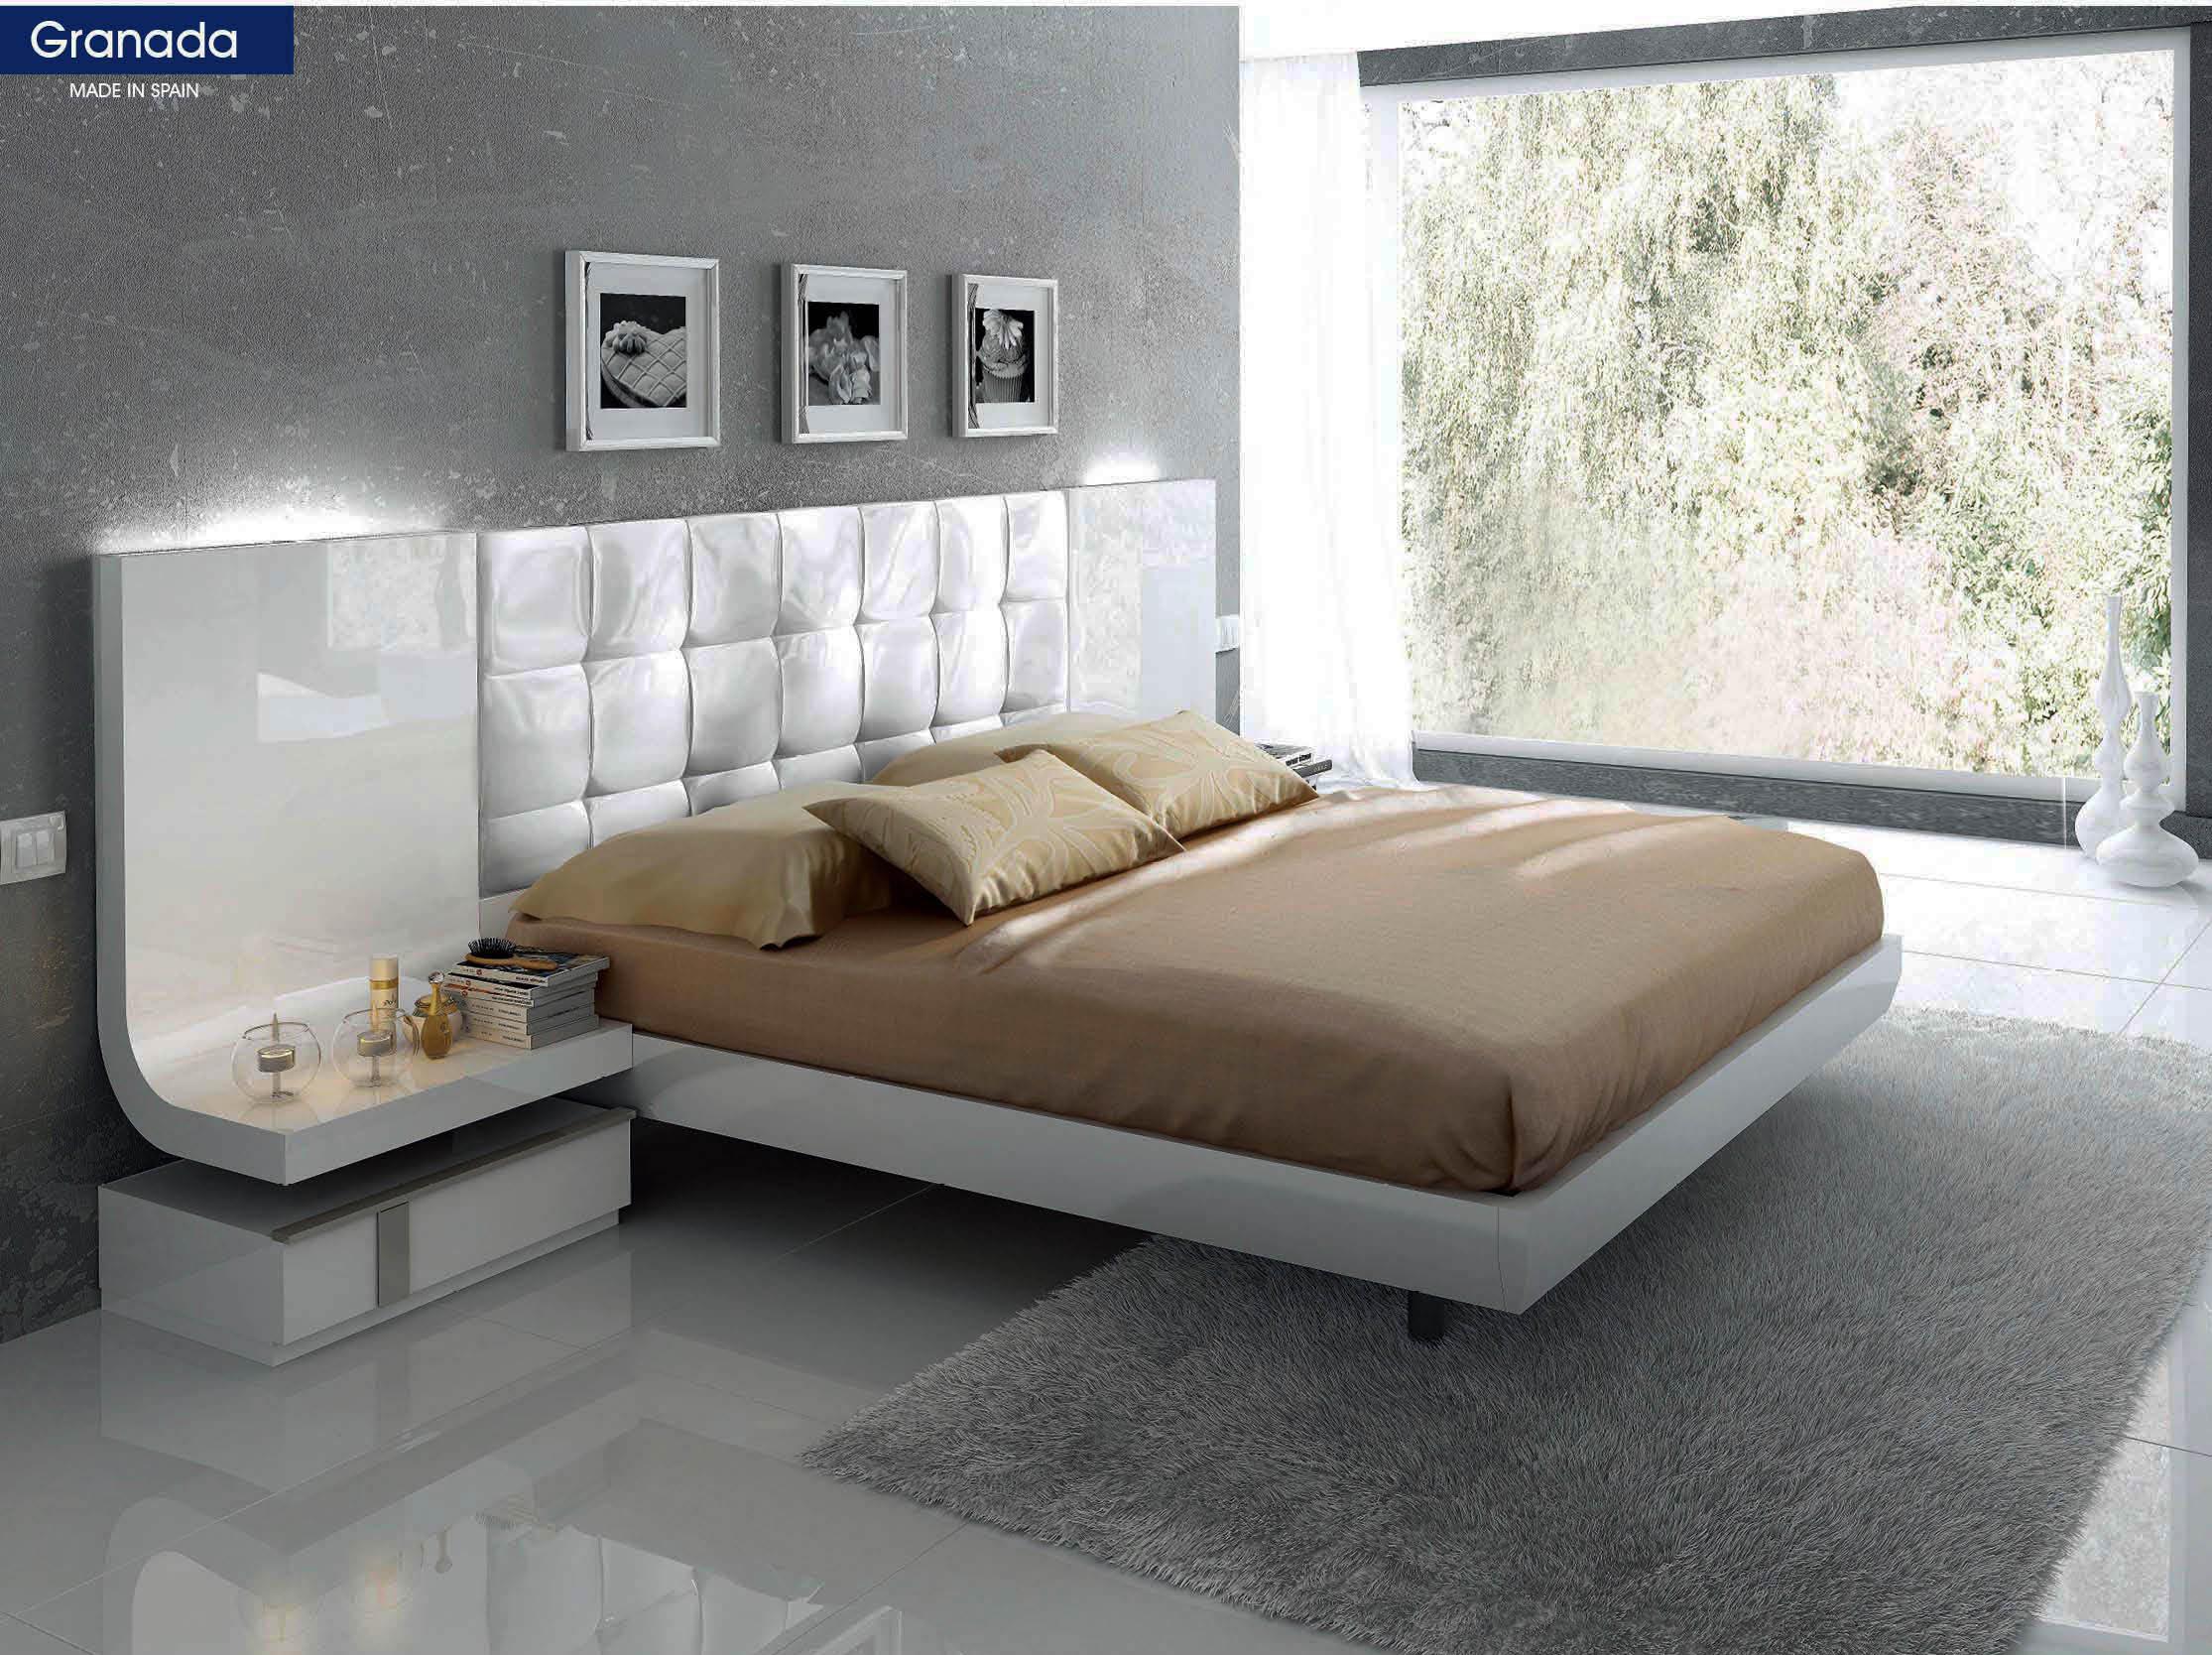 

    
Glossy White Queen Bedroom Set 3Pcs Contemporary Made in Spain ESF Granada
